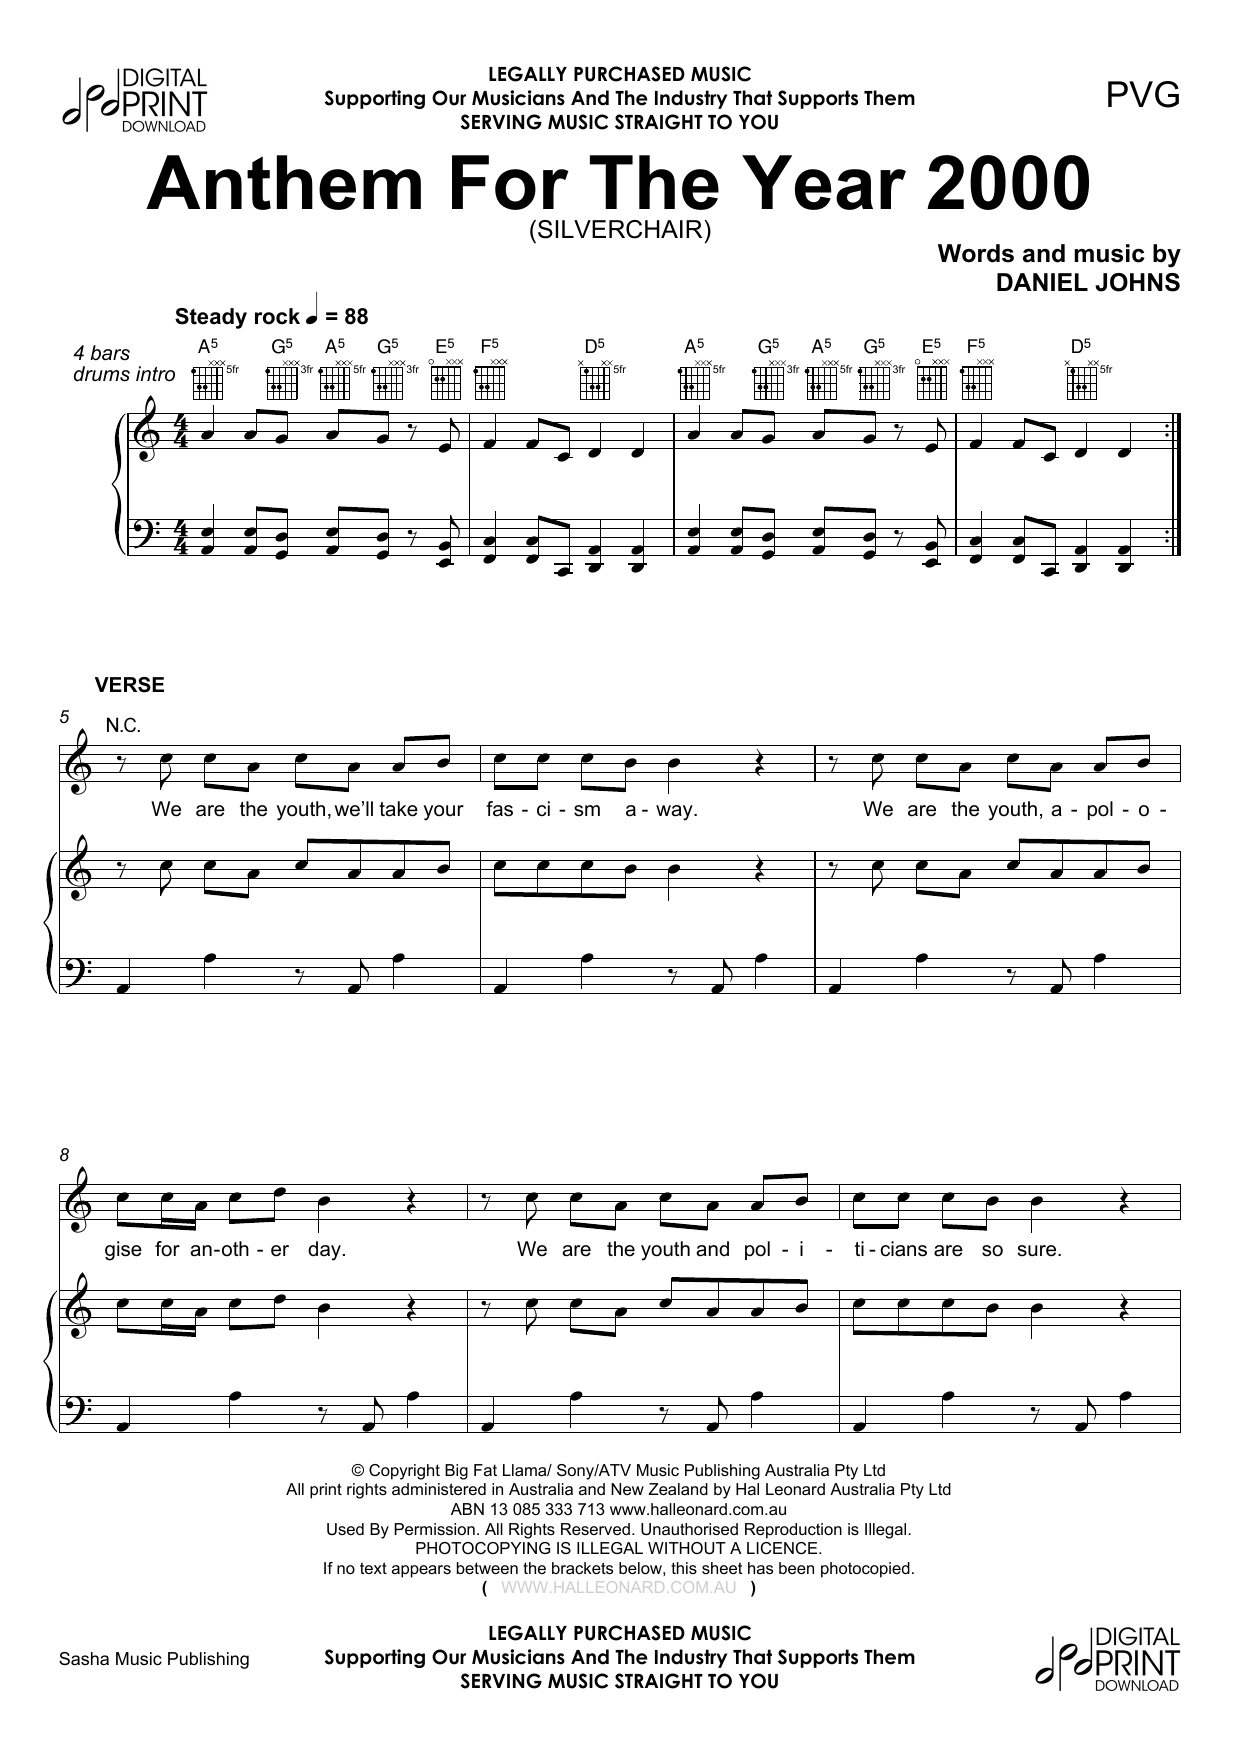 Download Silverchair Anthem For The Year 2000 Sheet Music